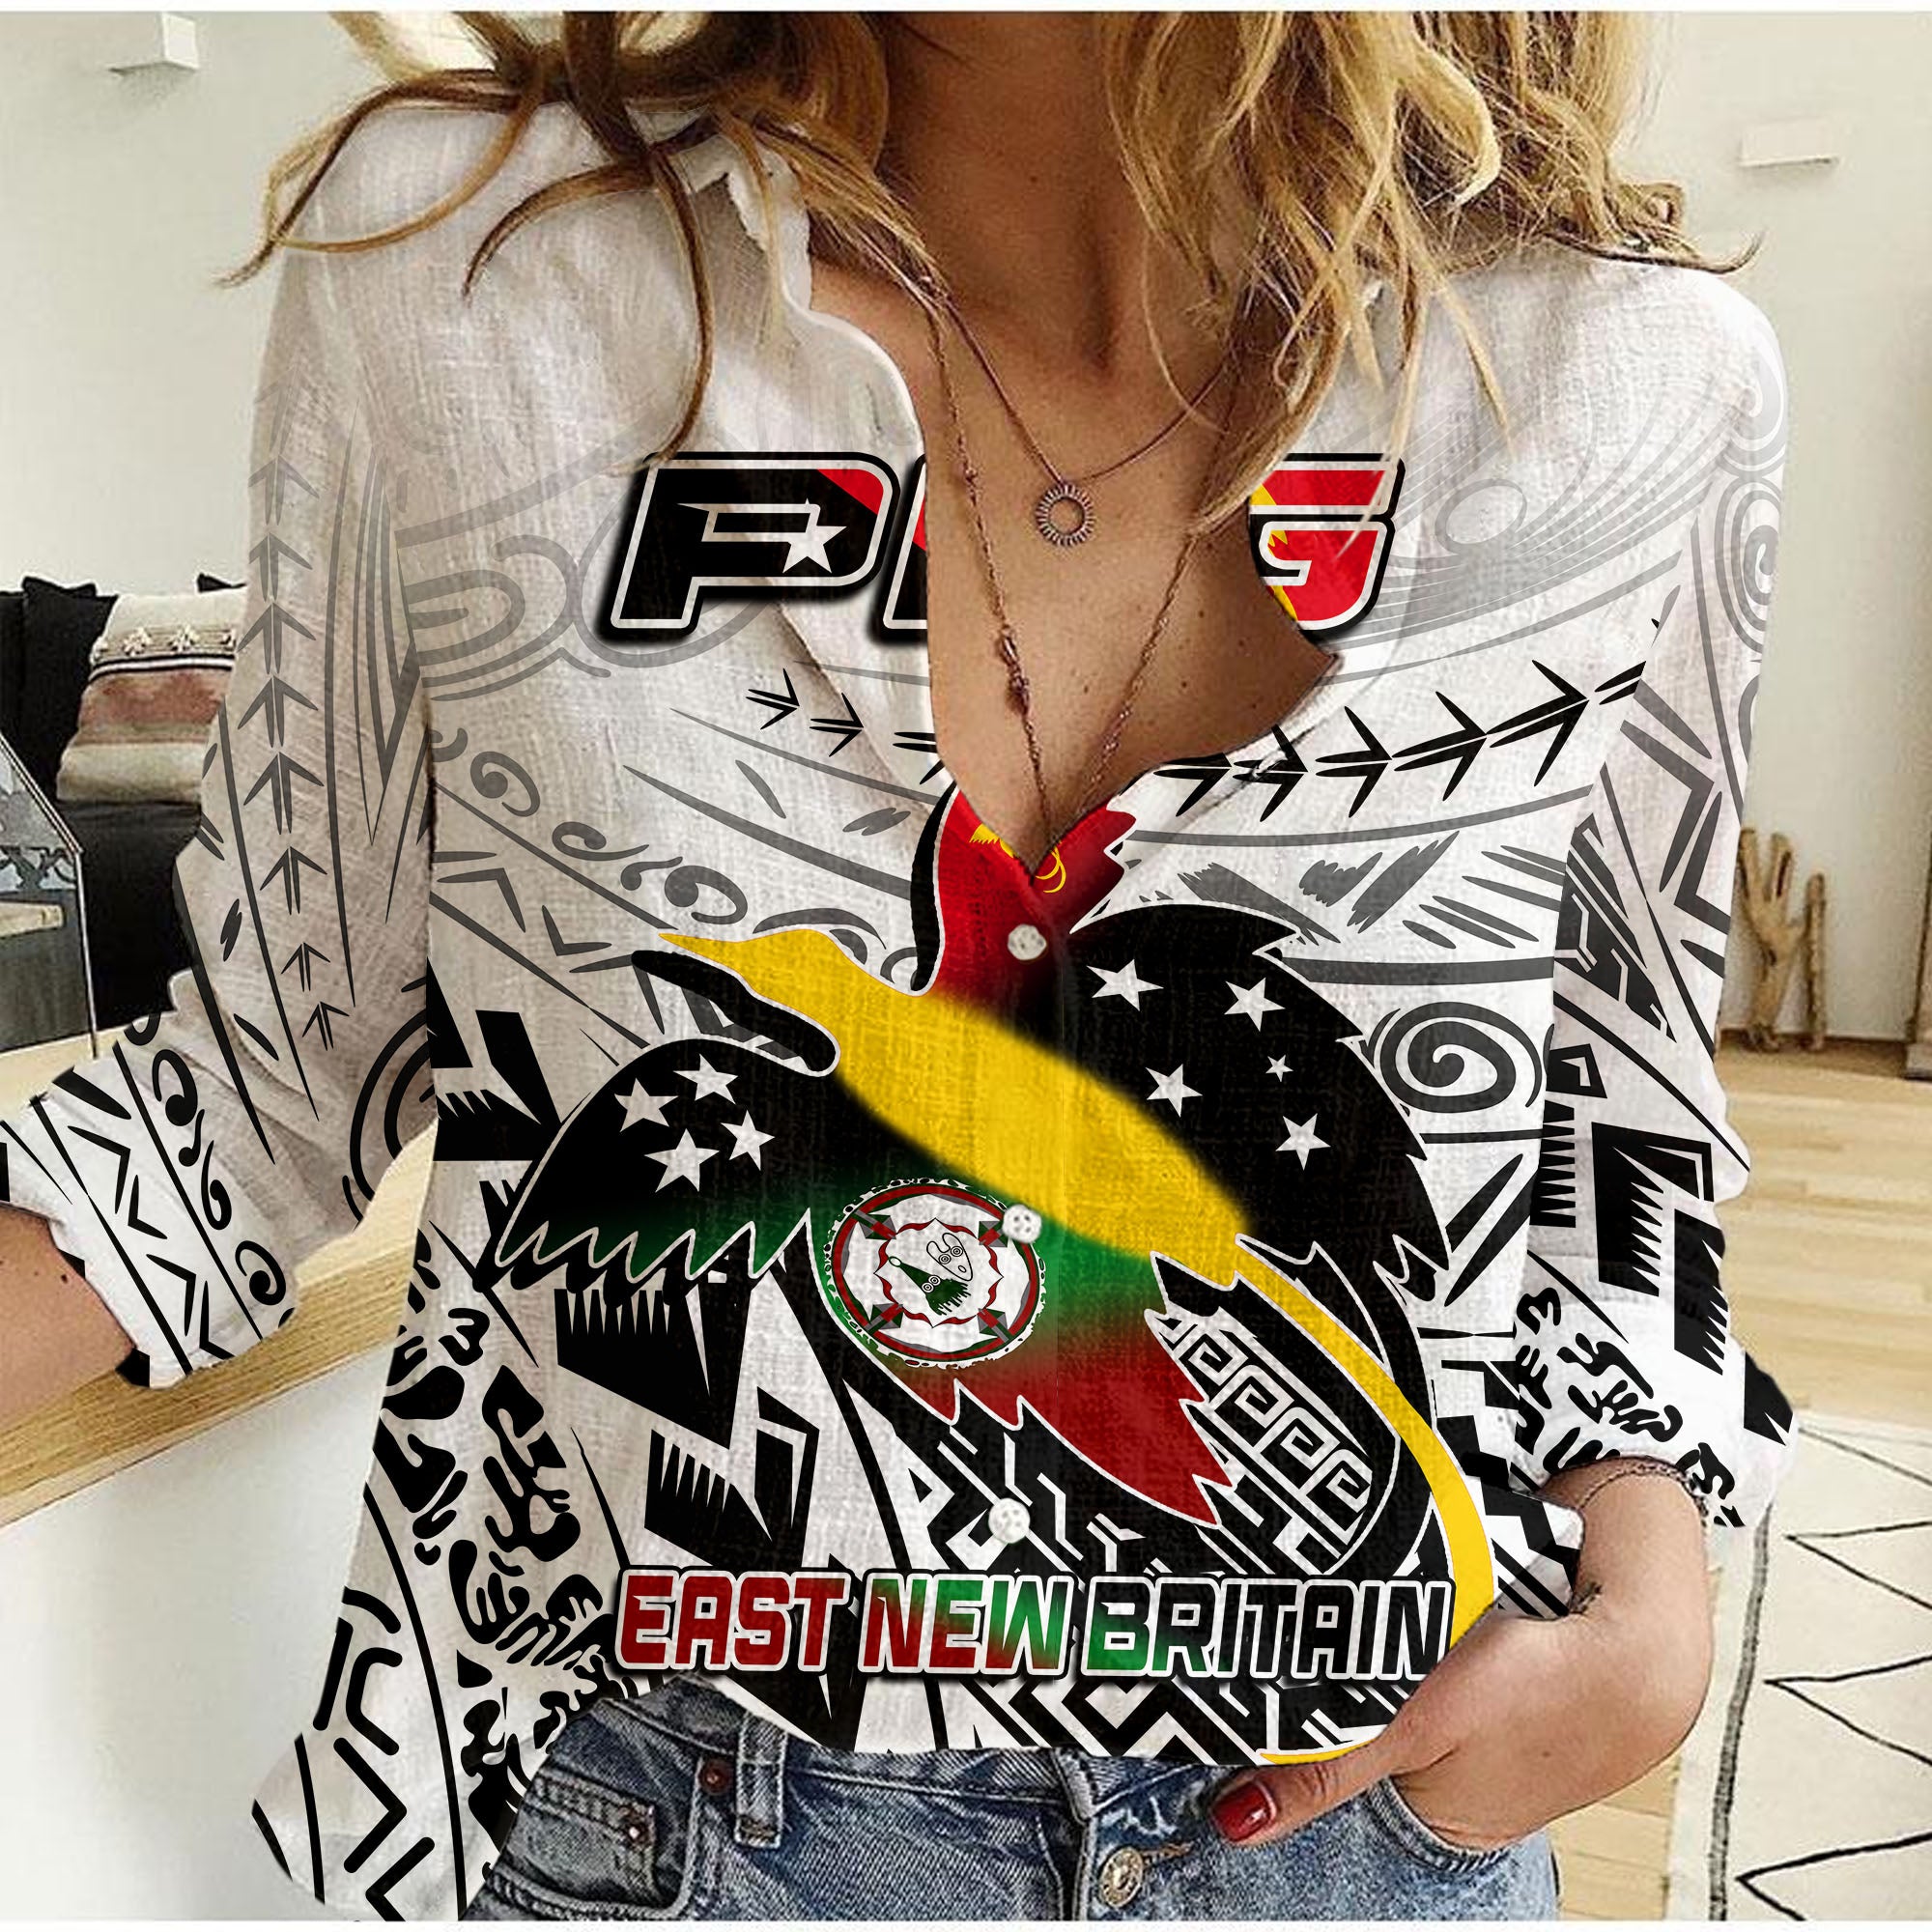 Papua New Guinea And East New Britain Province Casual Shirt LT6 Female White - Polynesian Pride